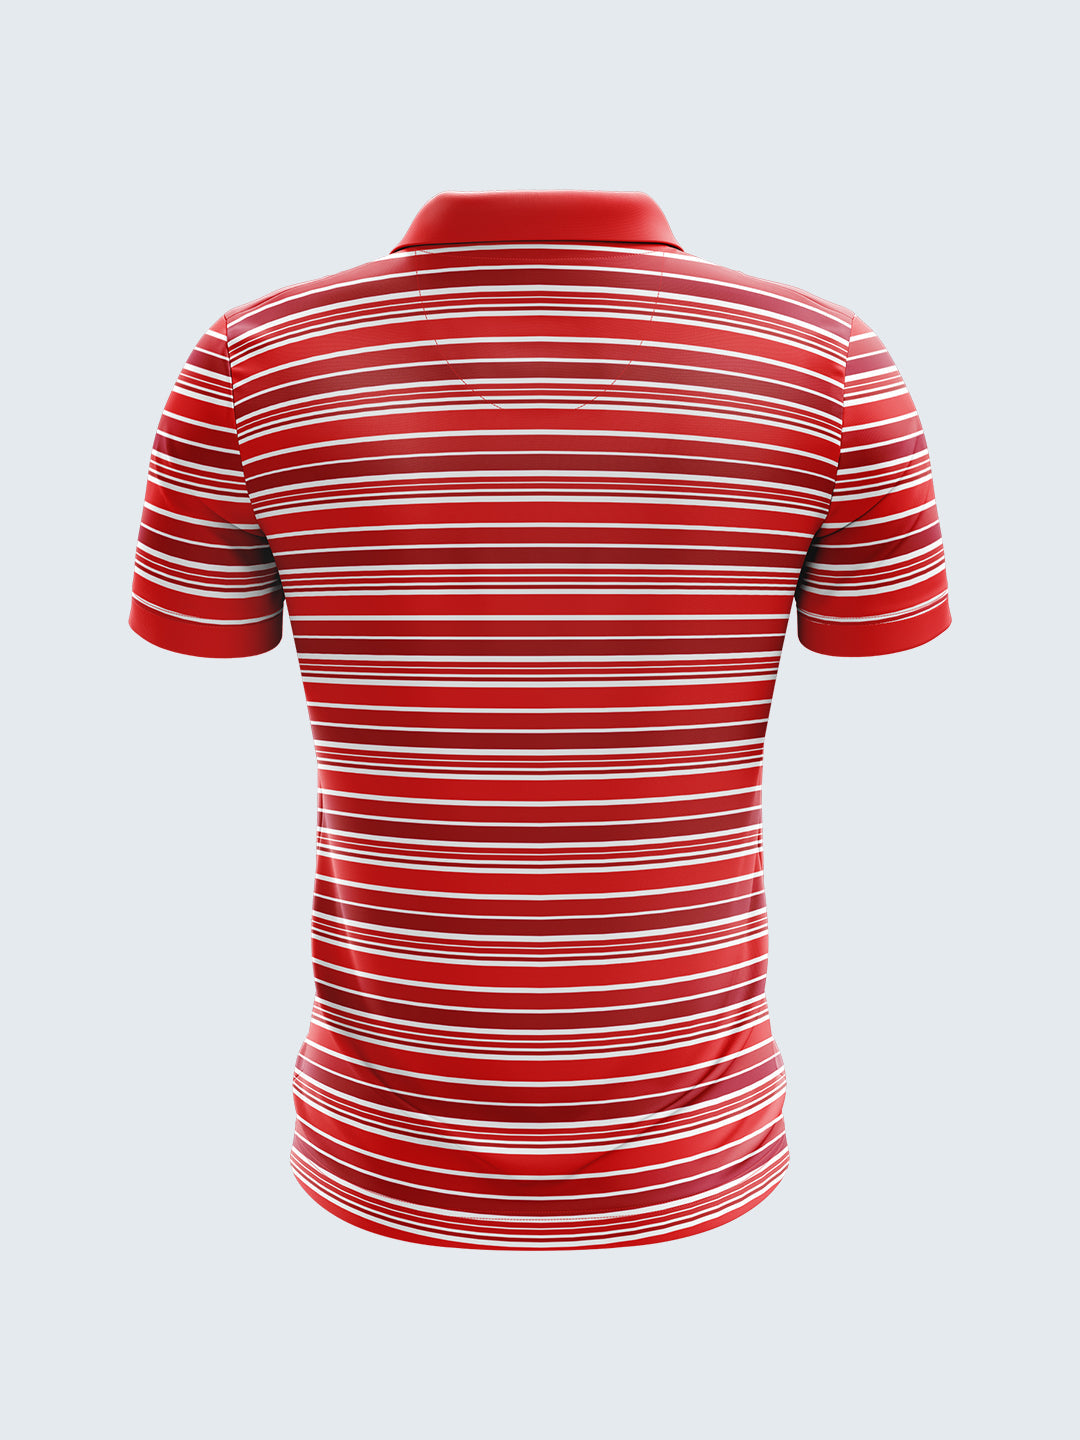 Customise Golf Polo T-Shirt - 2119RD - Front